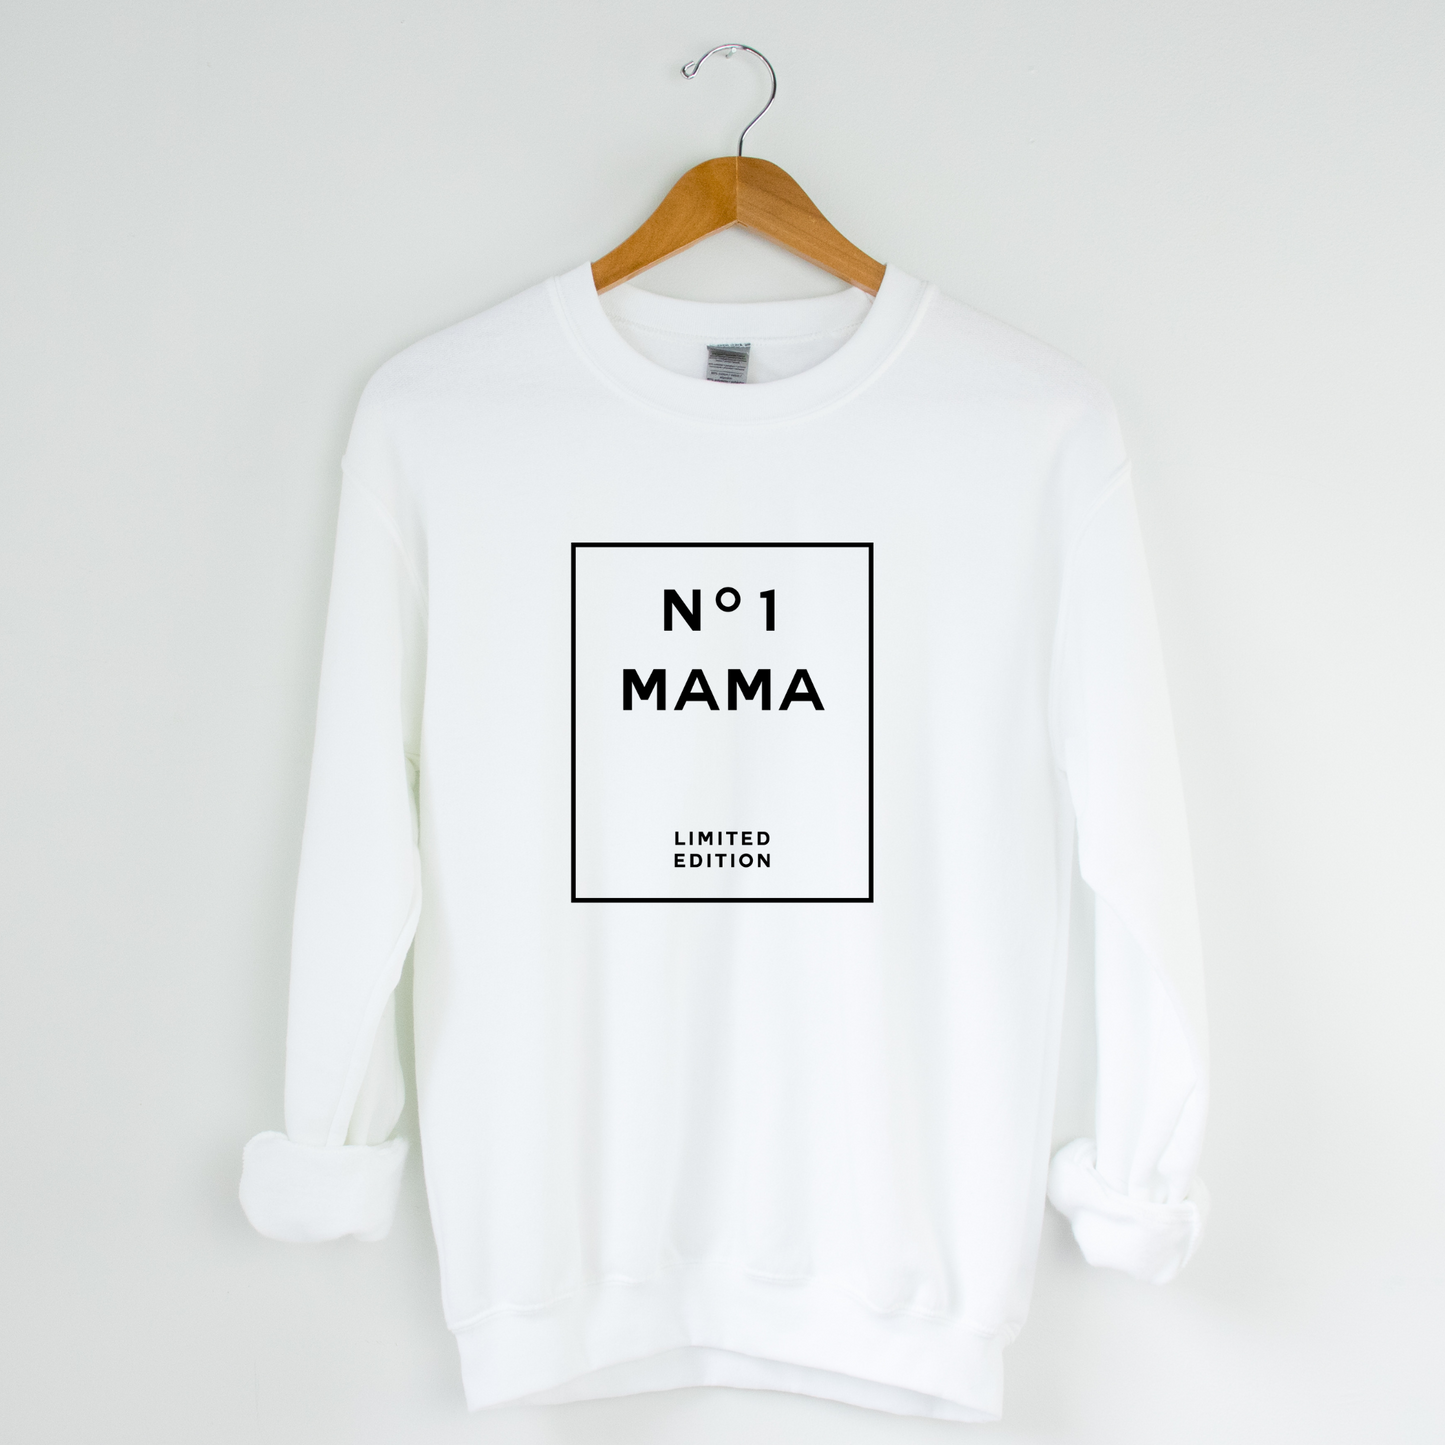 No. 1 Mama Limited Edition Graphic Crew Neck Sweater